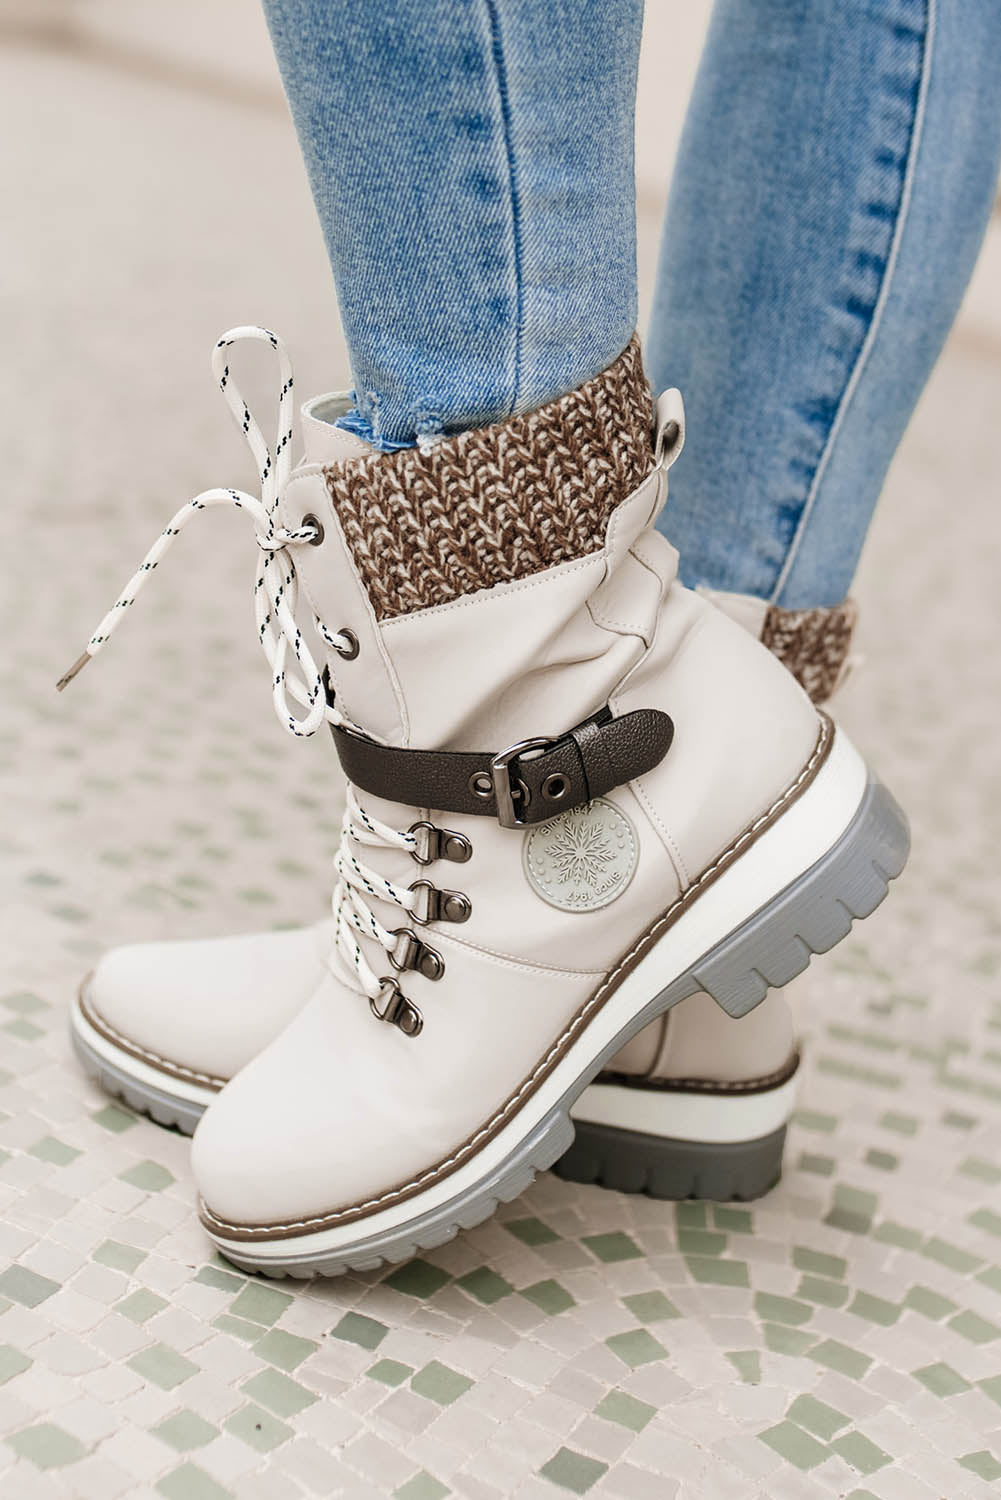 Buckle Lace-up Zipped PU Leather Heeled Boots